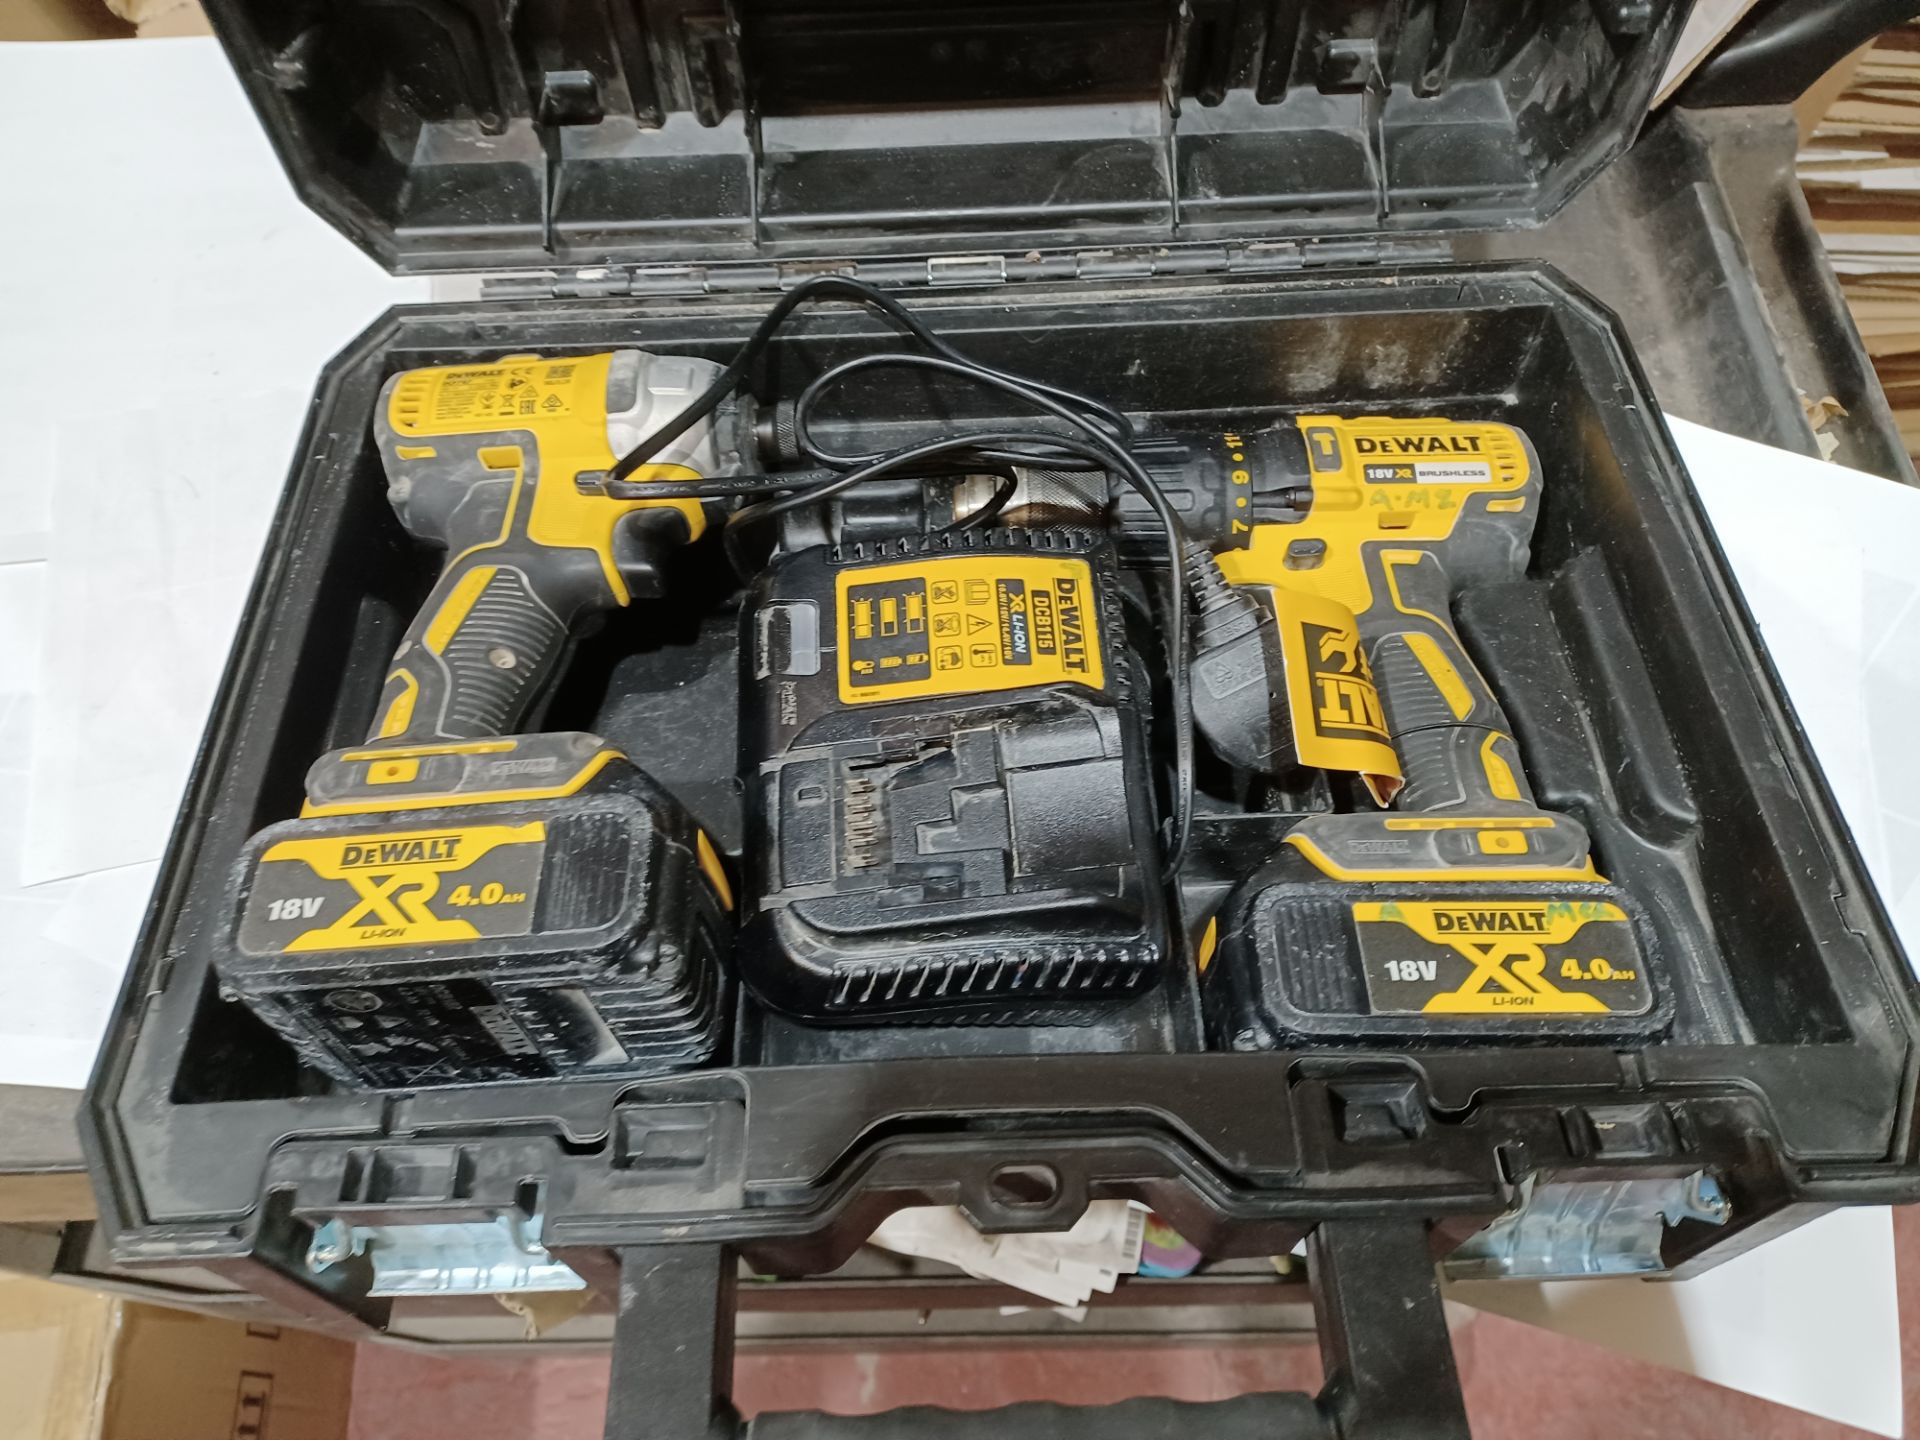 DEWALT DCK2060M2T-SFGB 18V 4.0AH LI-ION XR BRUSHLESS CORDLESS TWIN PACK WITH 2 BATTERIES CHARGER AND